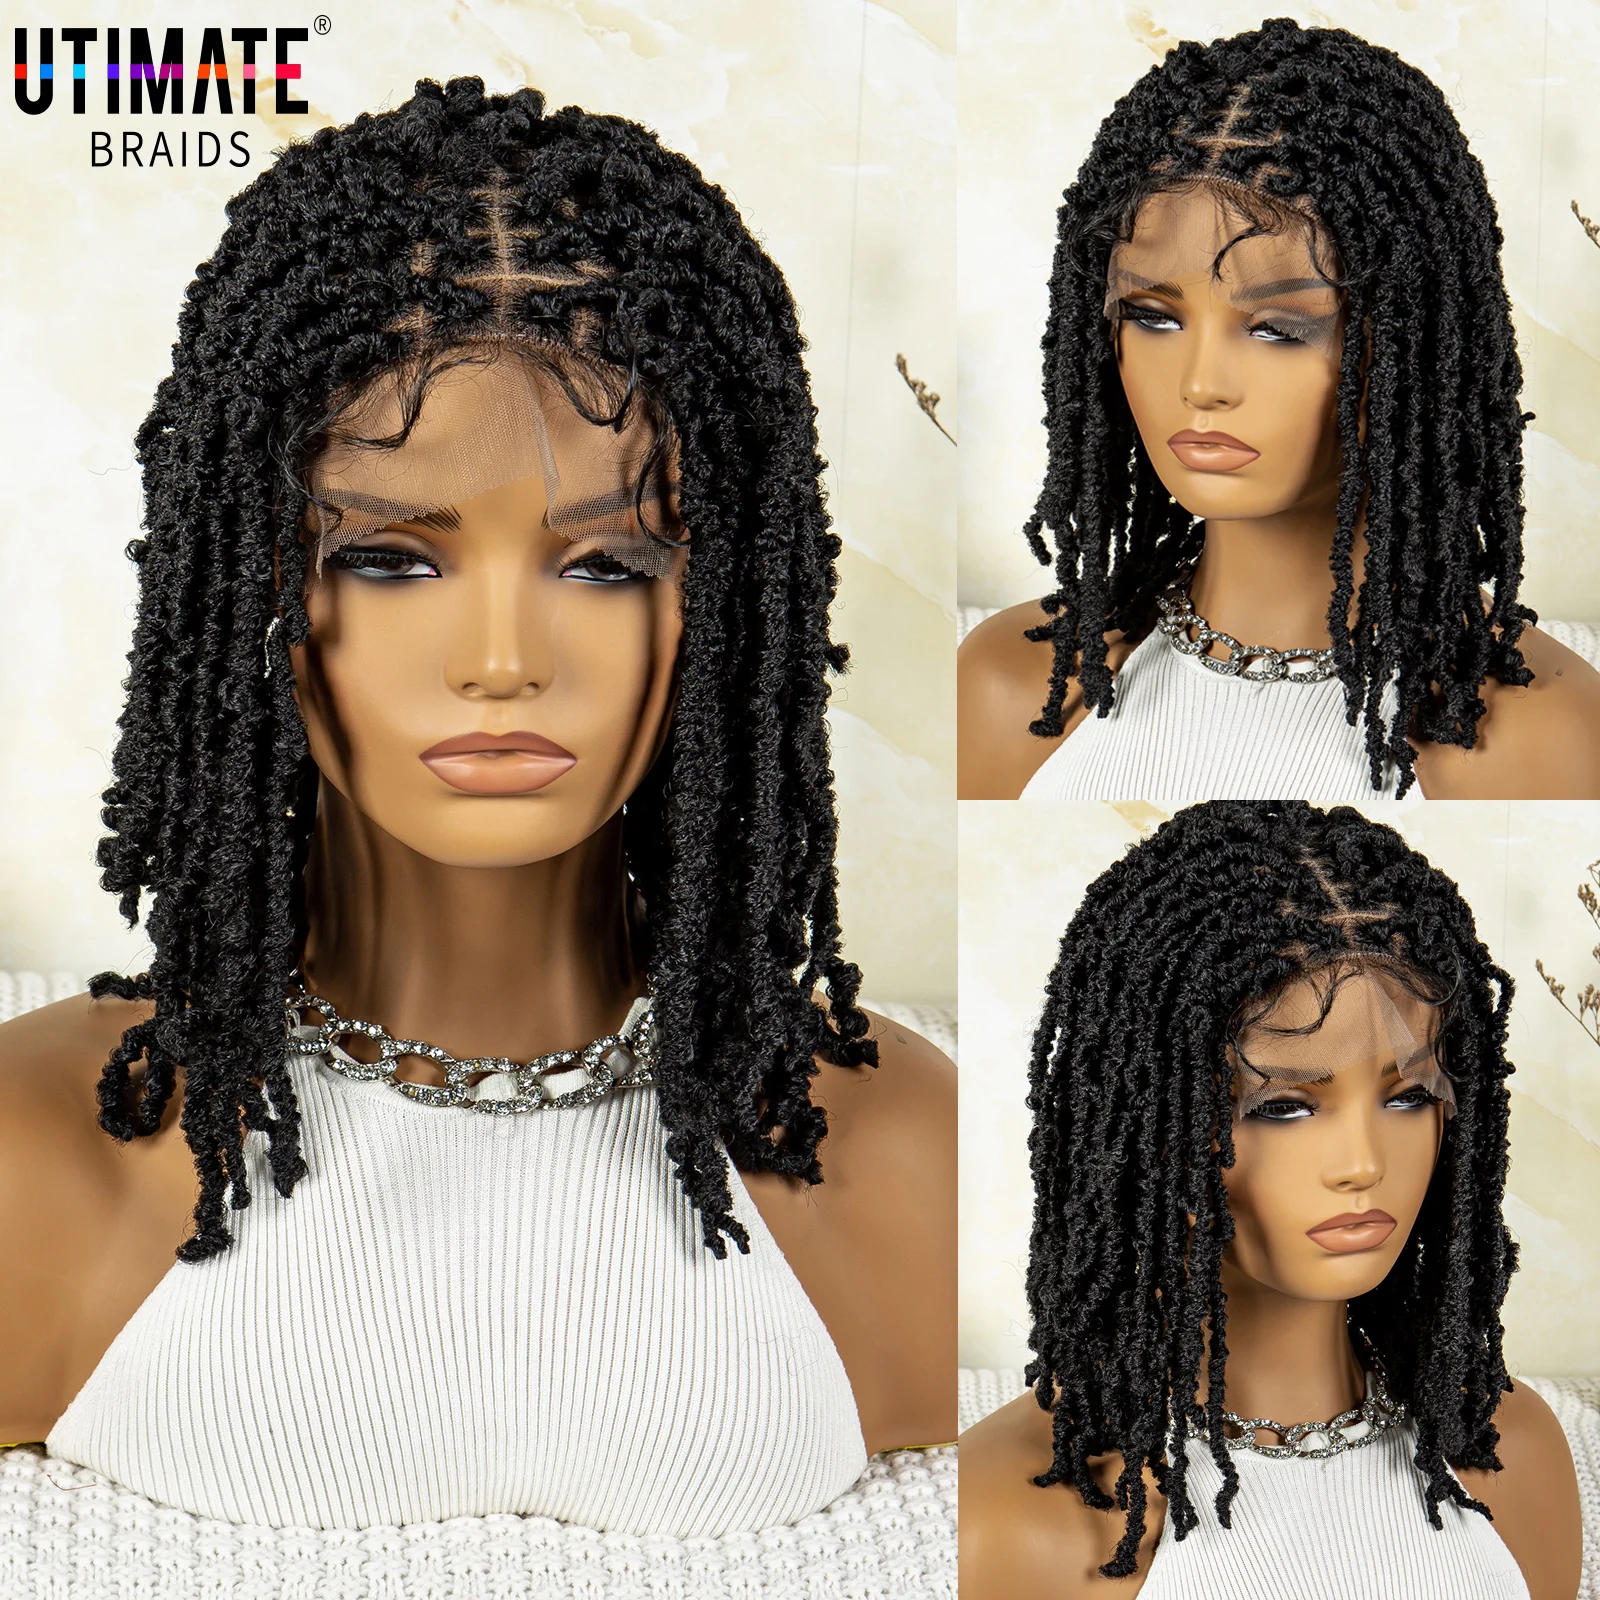 

Lace Front Synthetic Braid Wigs Dreadlock Wigs for Black Women Short Curly Big Afro Braid Wigs Faux Locs Braiding Synthetic Wigs